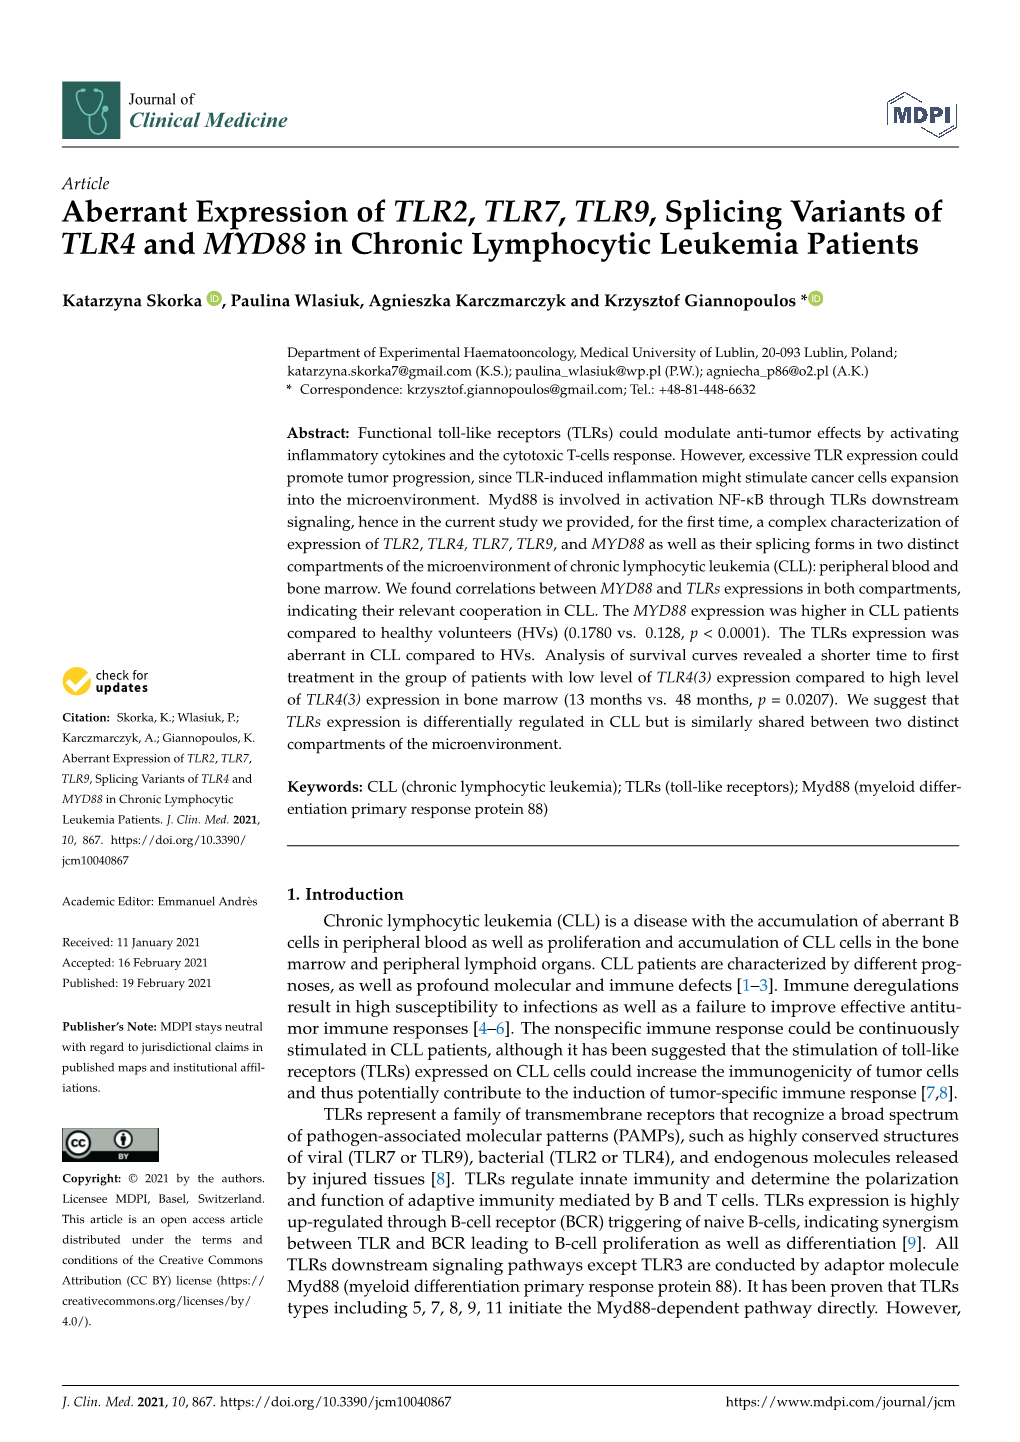 Aberrant Expression of TLR2, TLR7, TLR9, Splicing Variants of TLR4 and MYD88 in Chronic Lymphocytic Leukemia Patients